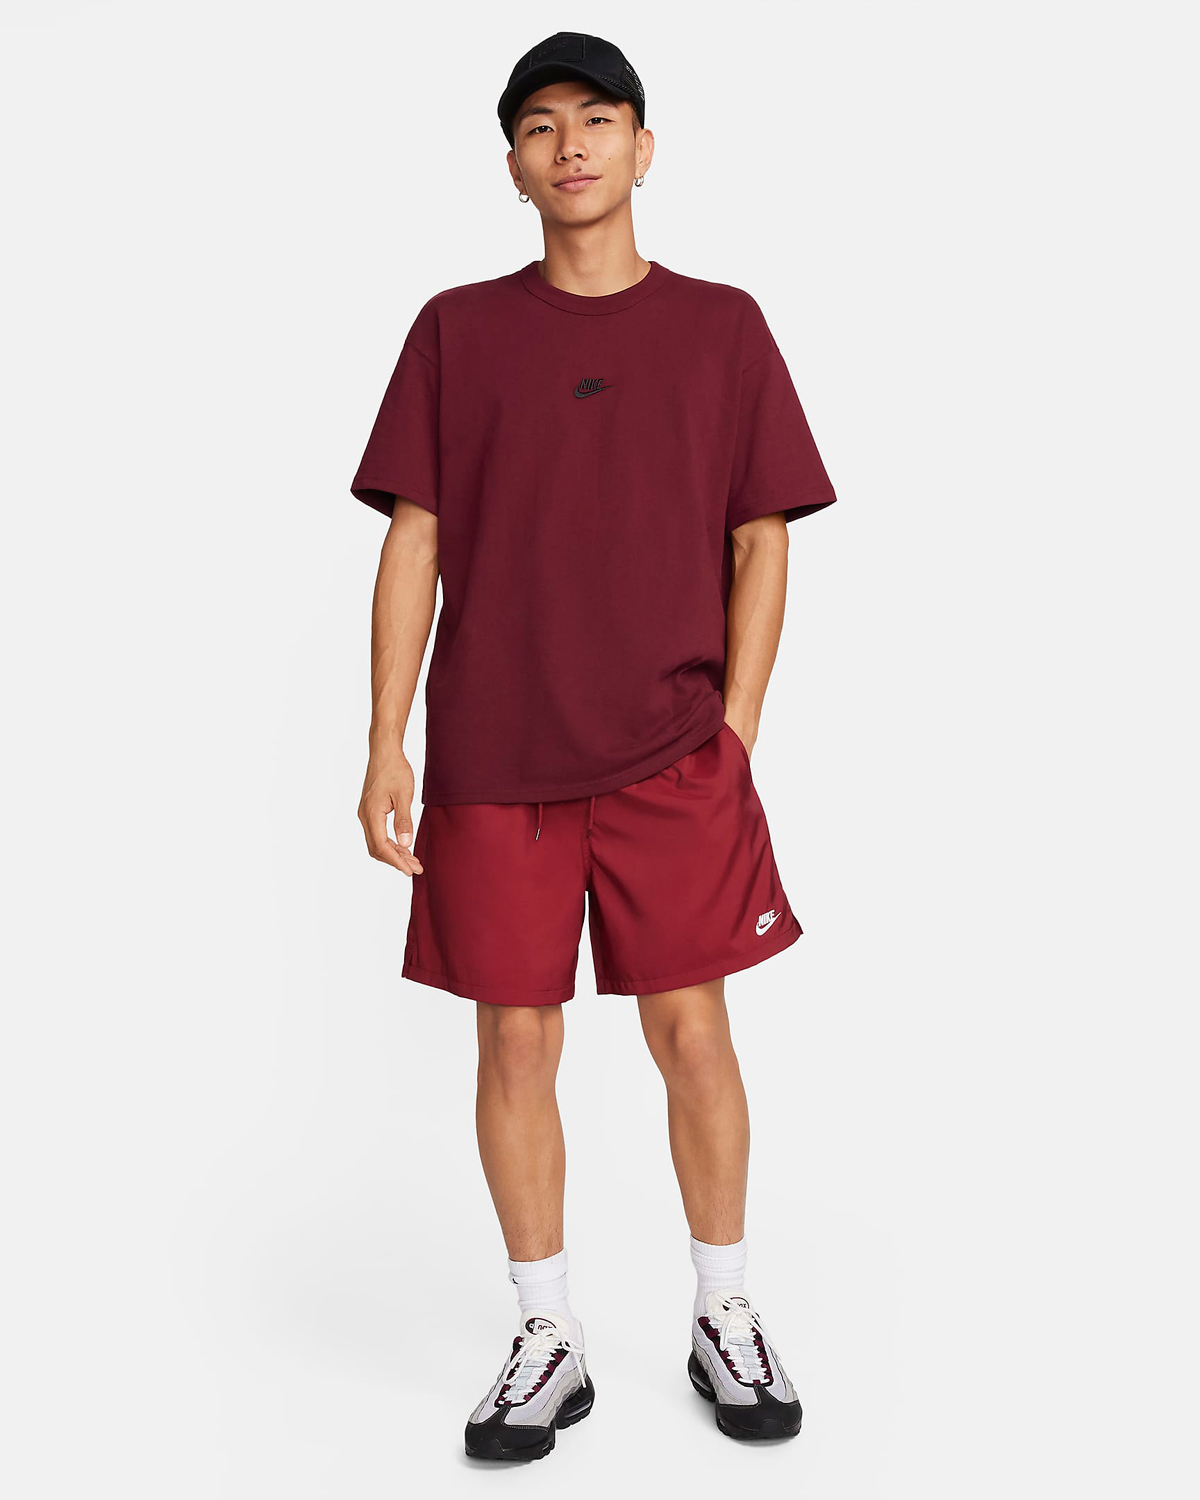 Nike Team Red Clothing Shirts Hoodies Pants Sneakers Outfits